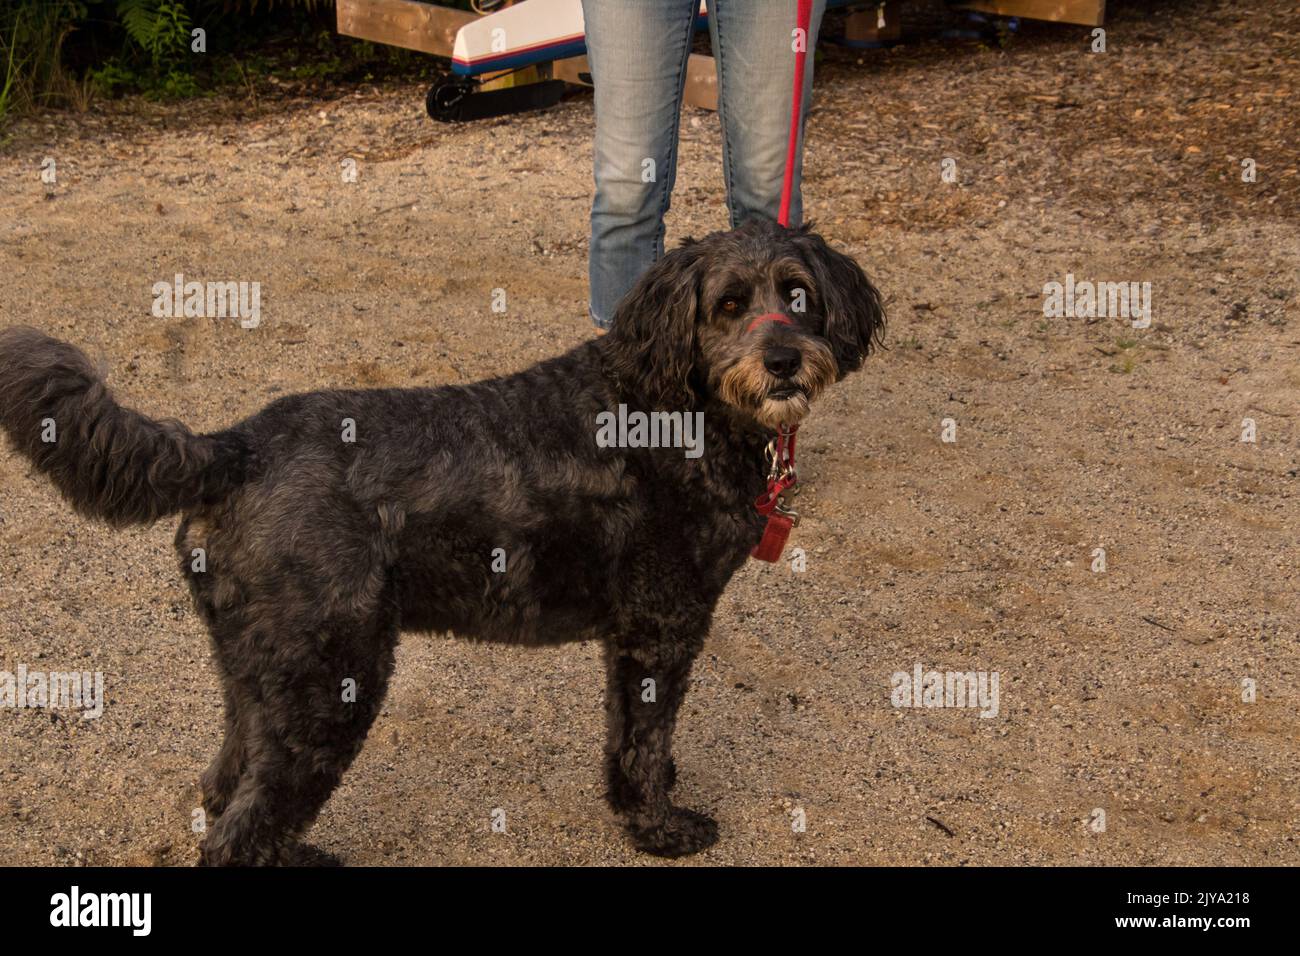 A black labradoodle standing on sand with a red leash attached to him Stock Photo